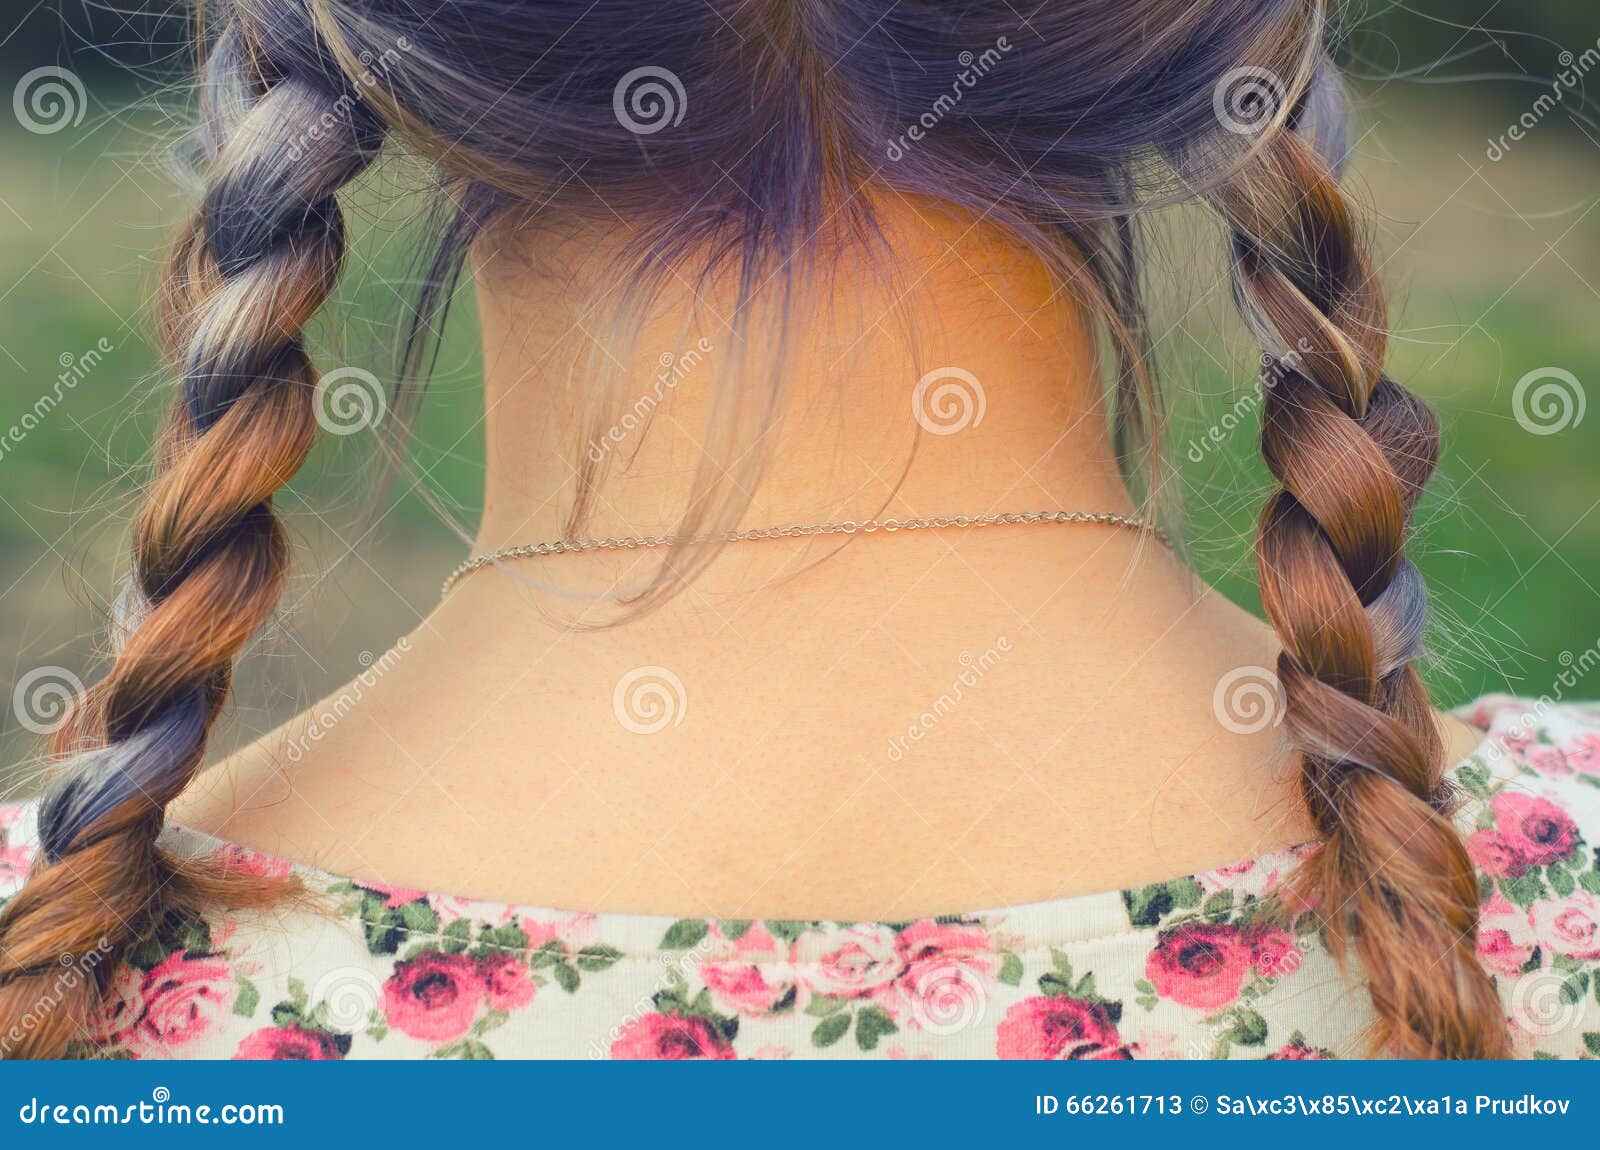 3. "The Best Haircuts for Teenage Girls with Blue Hair" - wide 3